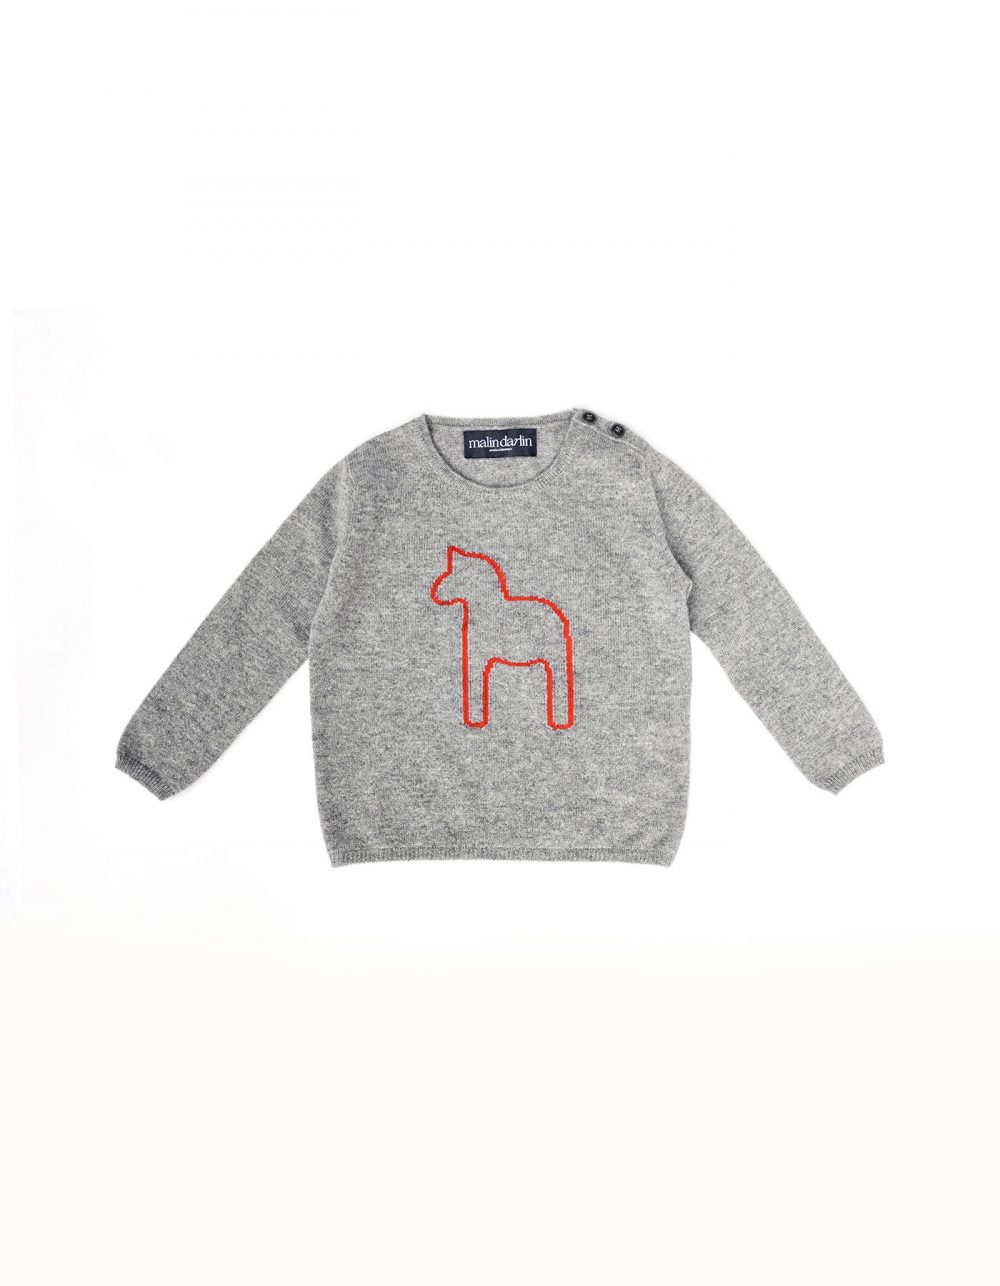 The grey baby pony kids cashmere jumper laid flat on a white back drop.